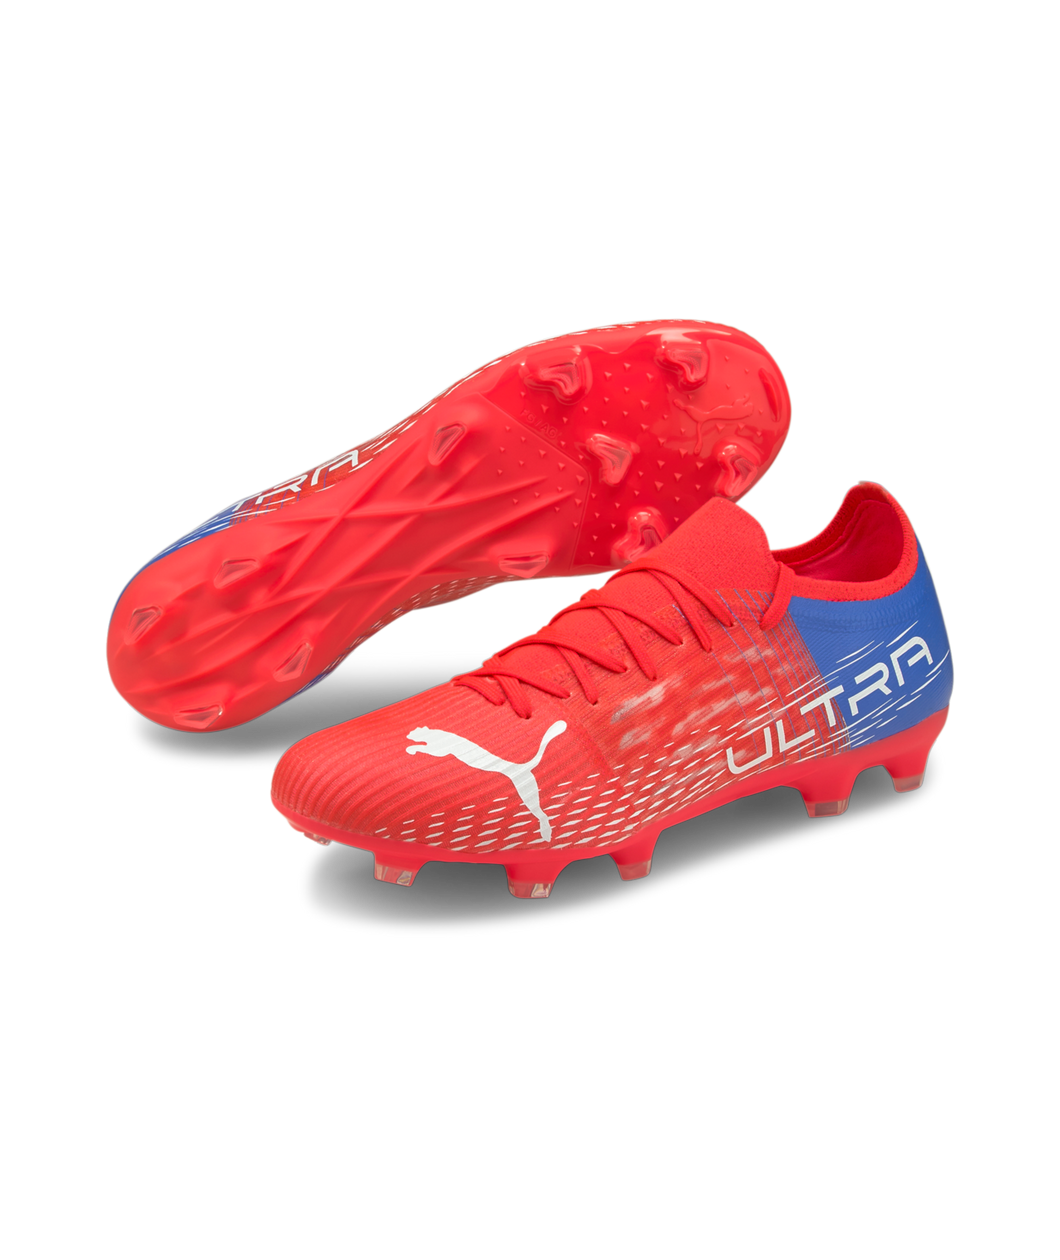 Puma Ultra 3.3 FG/AG Soccer Cleat 106523 01 PINK/WHITE/BLUE